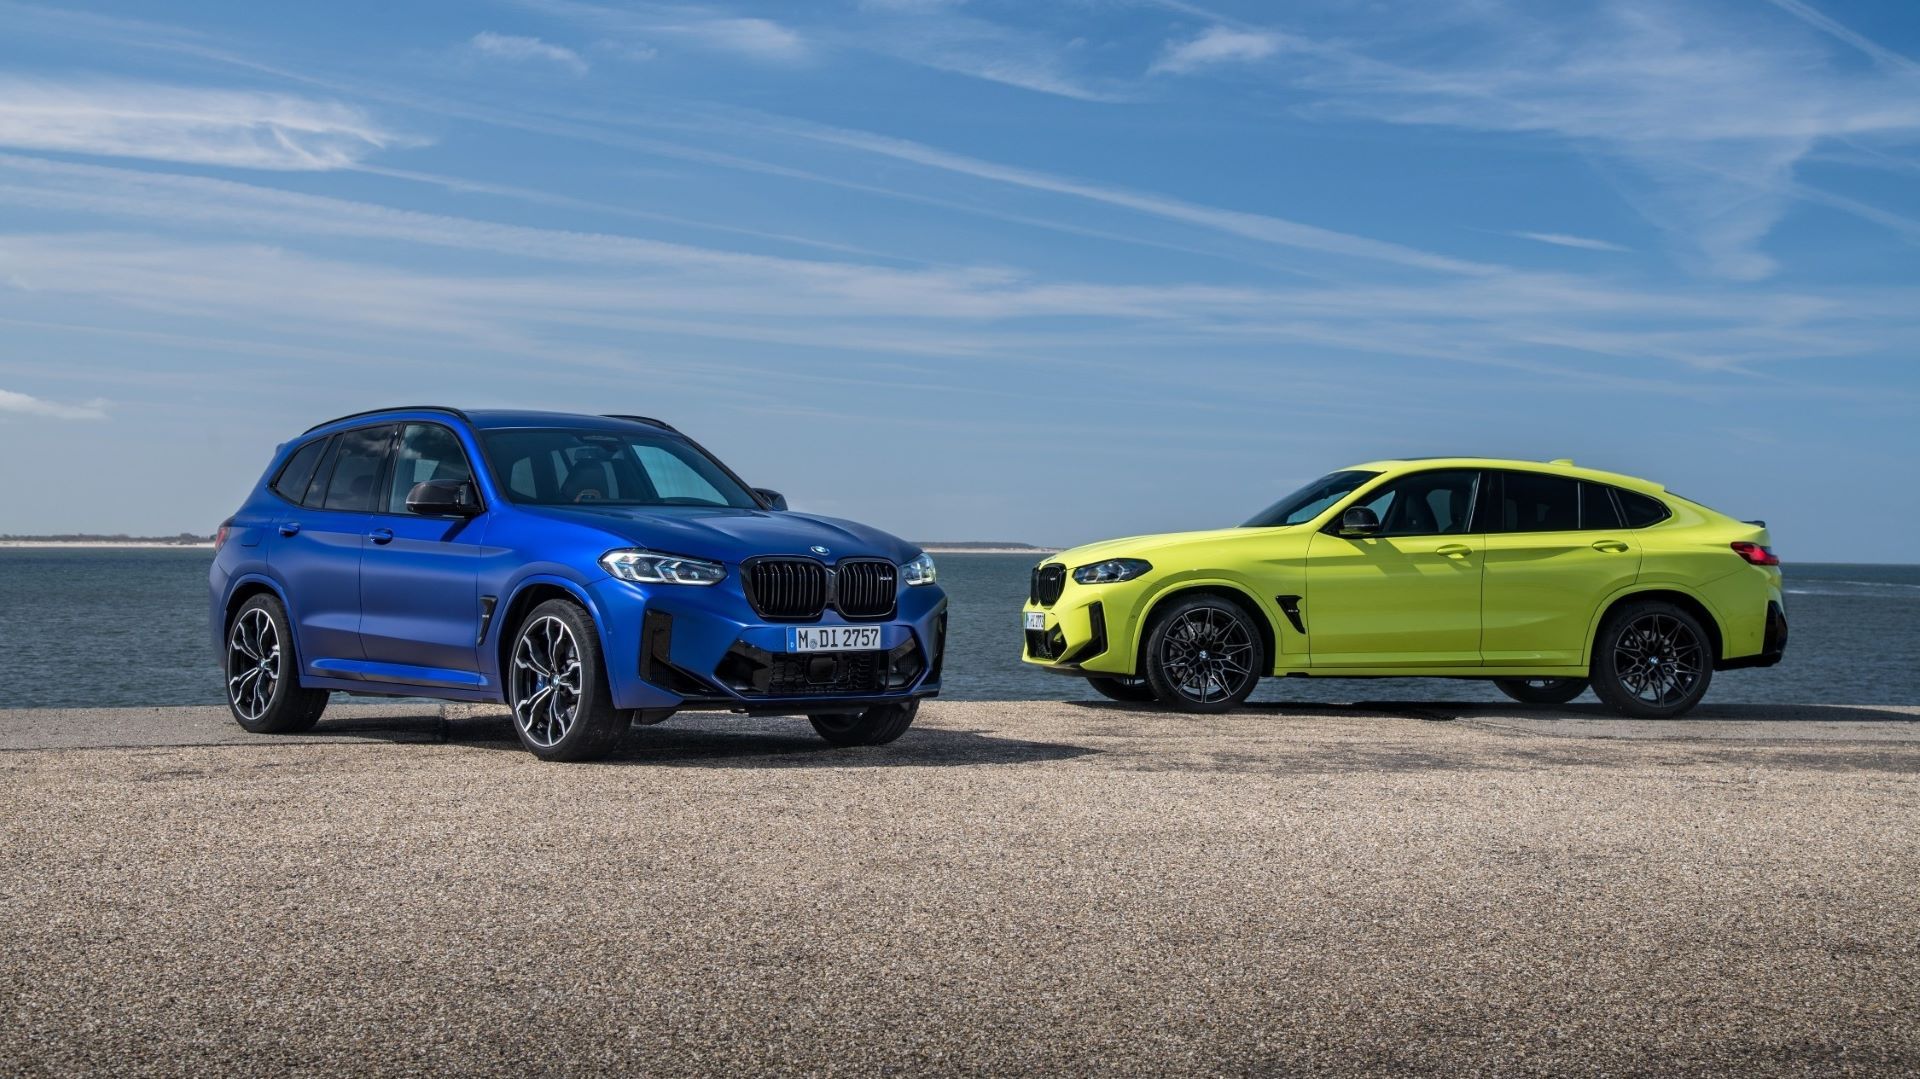 A side profile shot of the BMW X3 M and X4 M Competition models parked